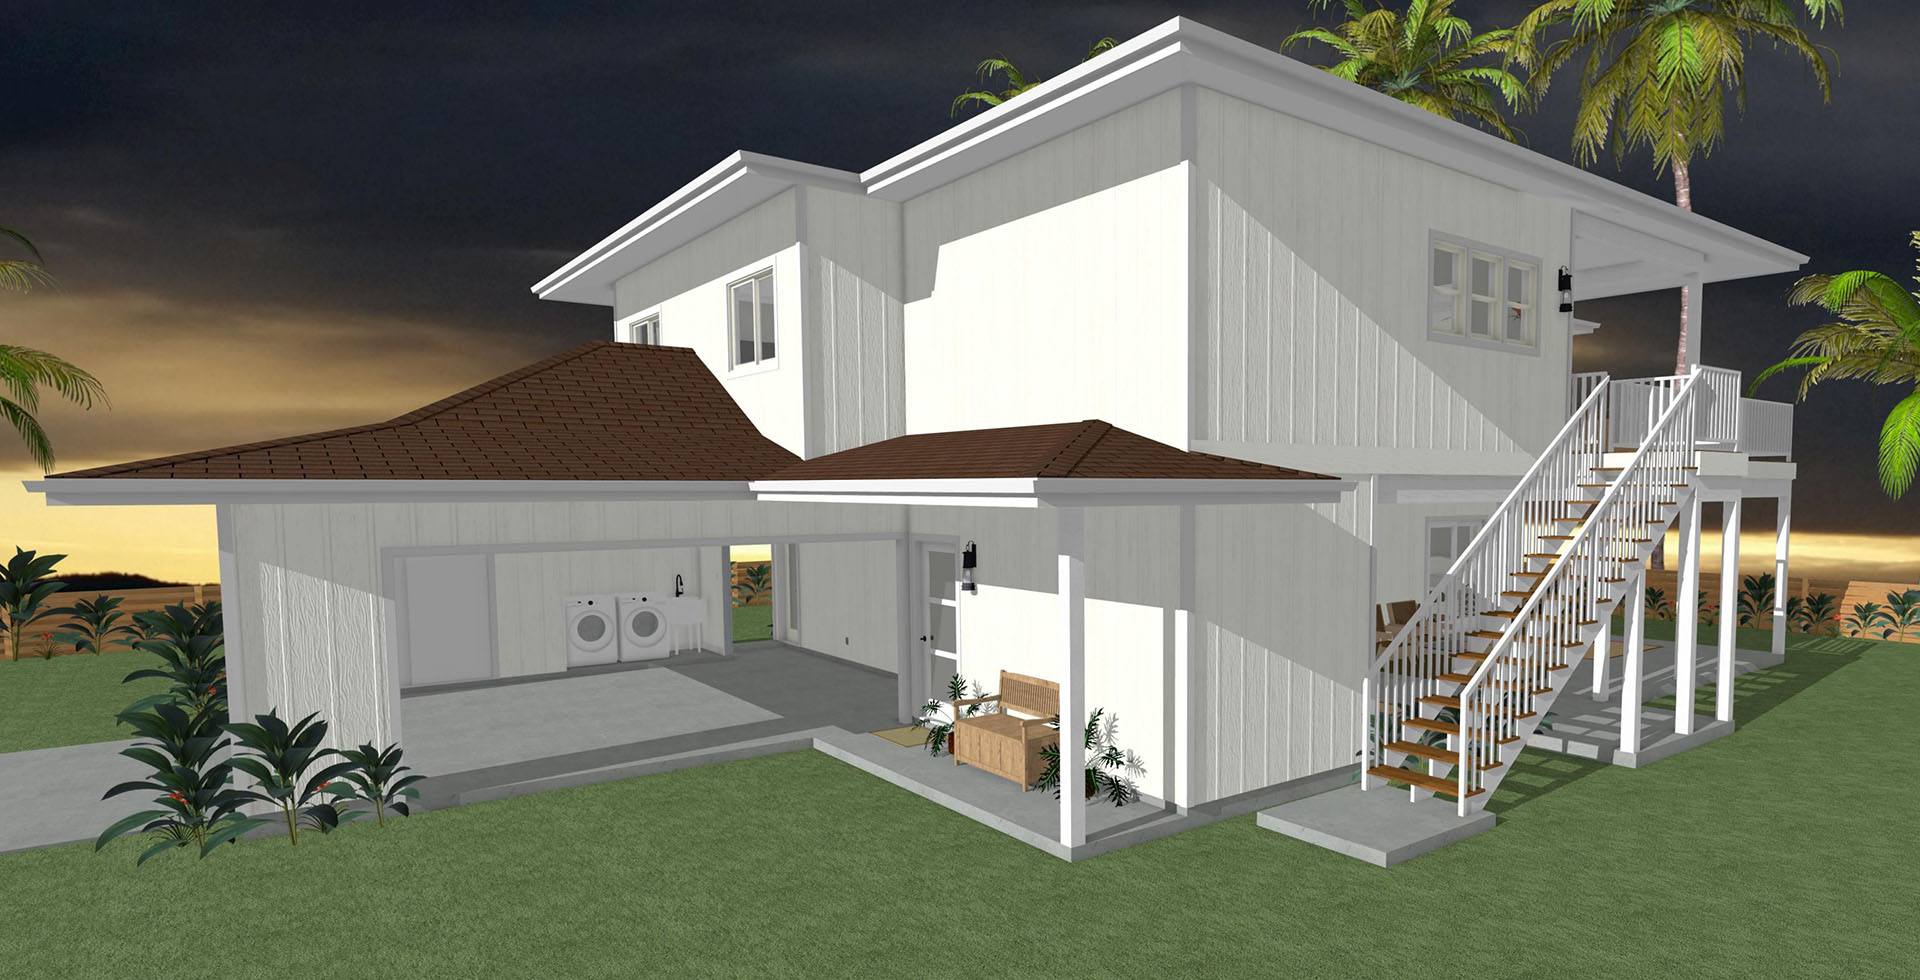 Hilo exterior showing carport and stairs